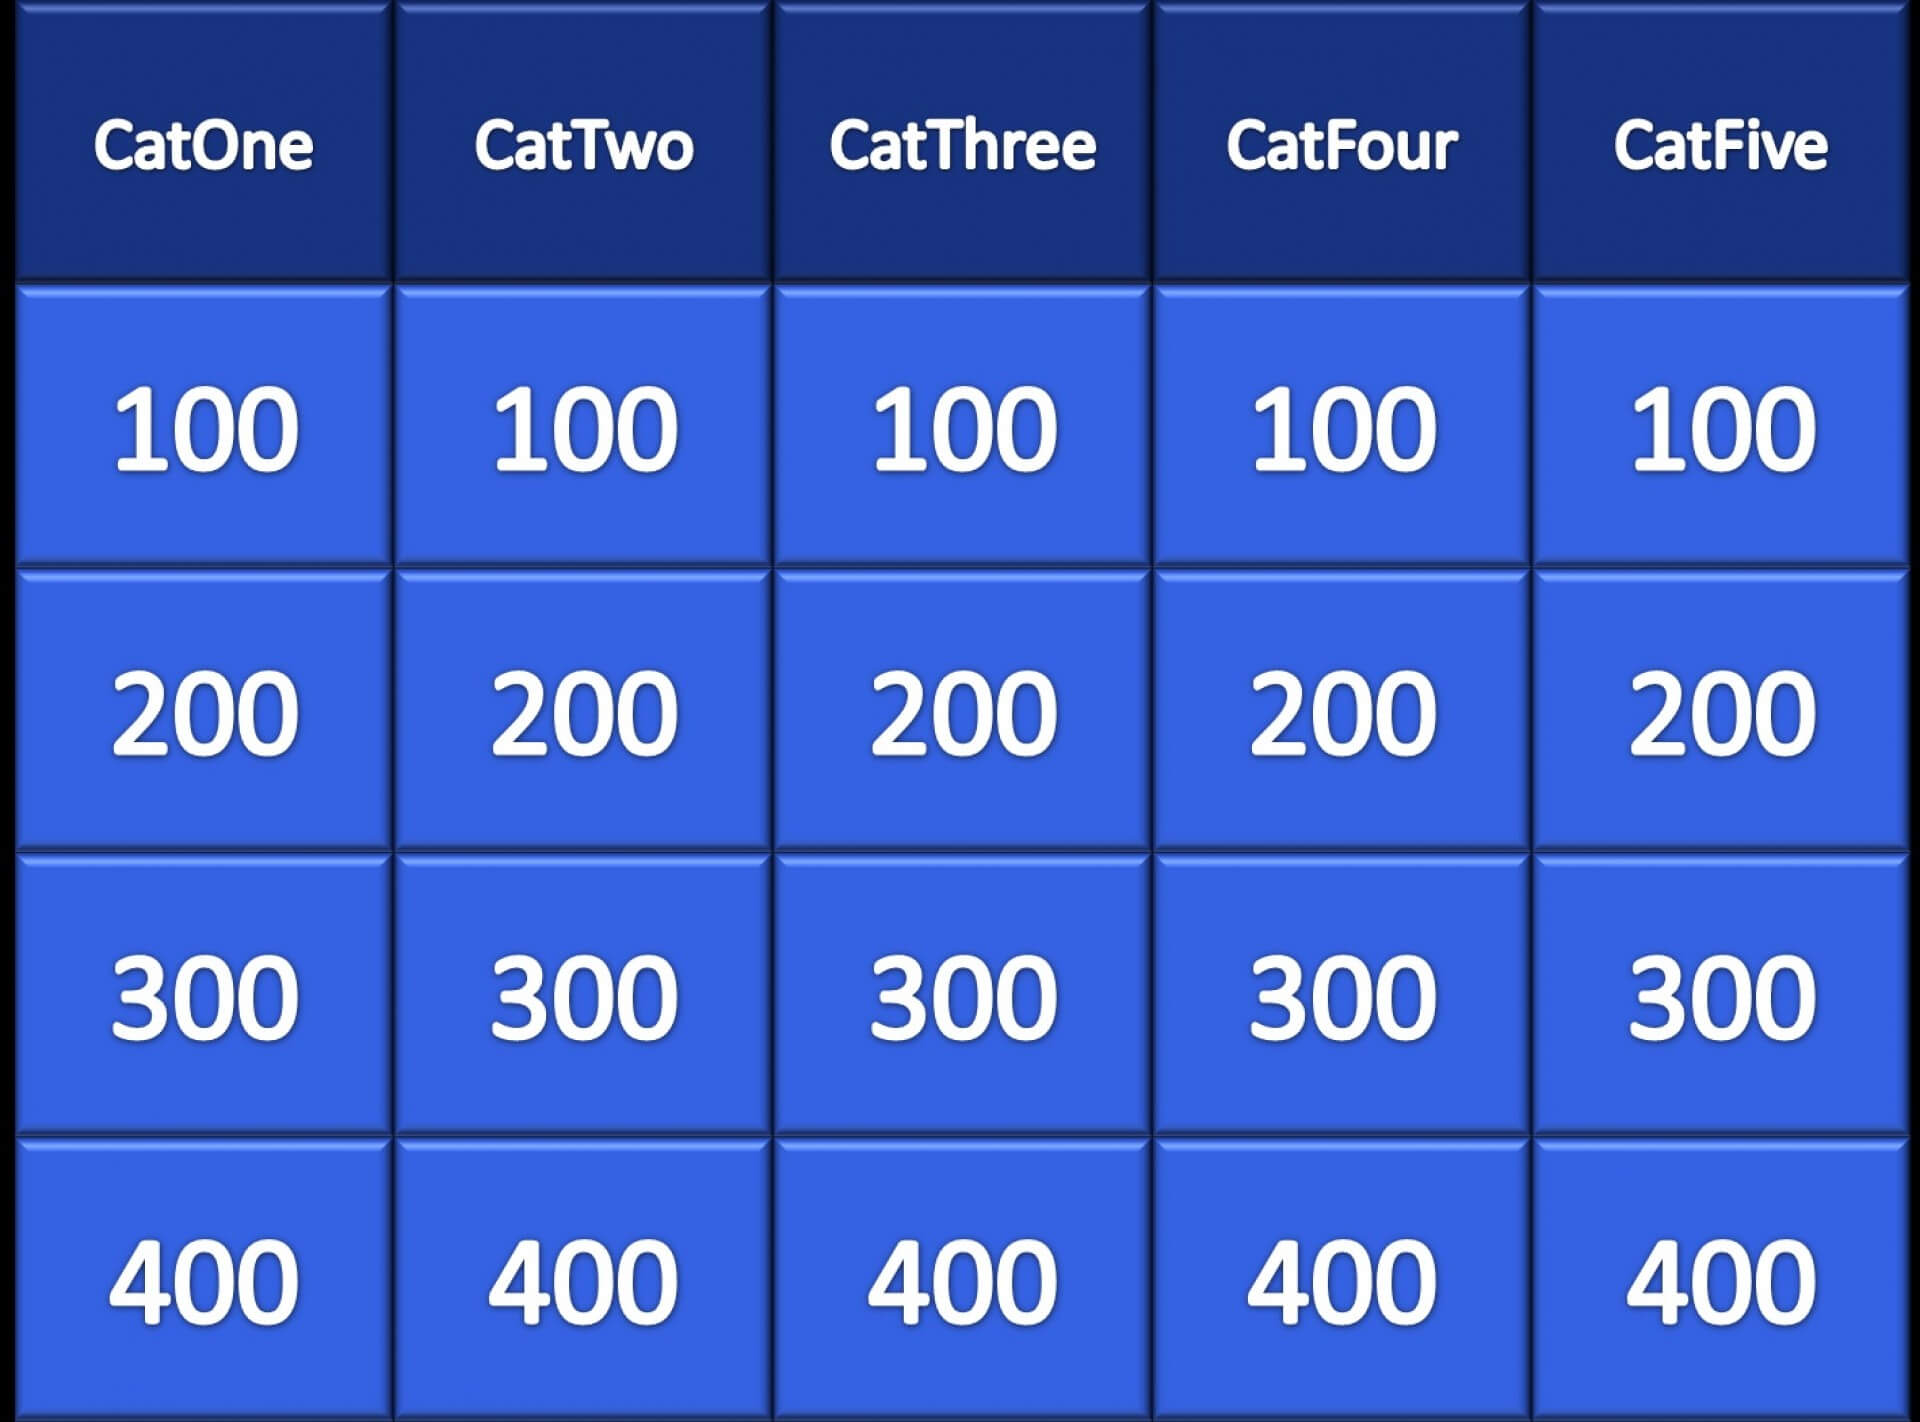 010 Sounds Jeopardy Powerpoint Template With Score Excellent Regarding Jeopardy Powerpoint Template With Sound